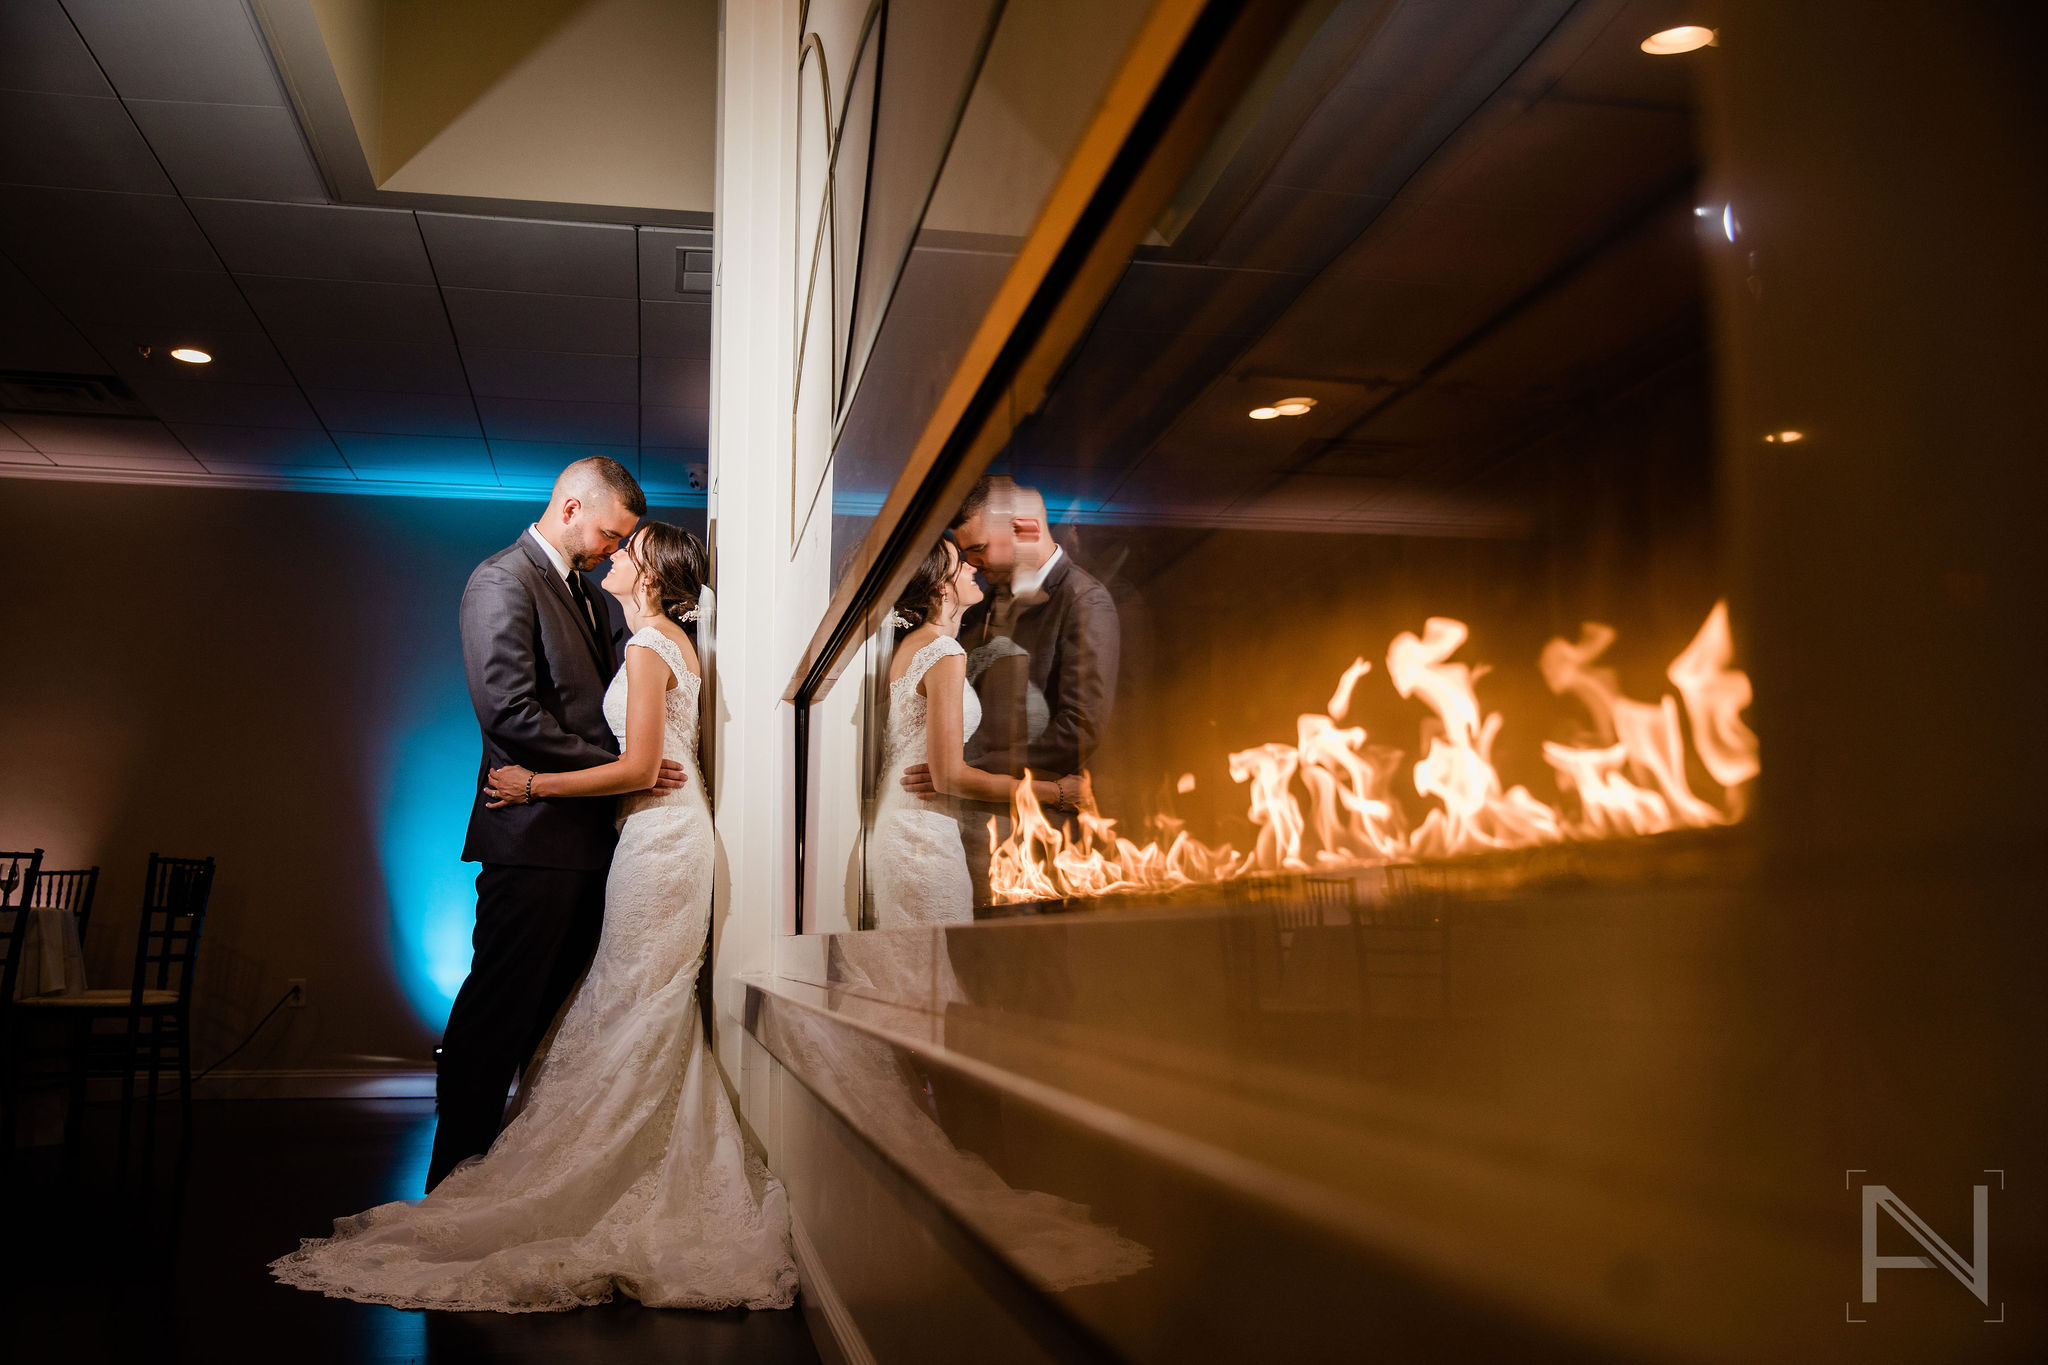 Wedding Couple in Front of Fireplace | Anthony Niccoli Photography